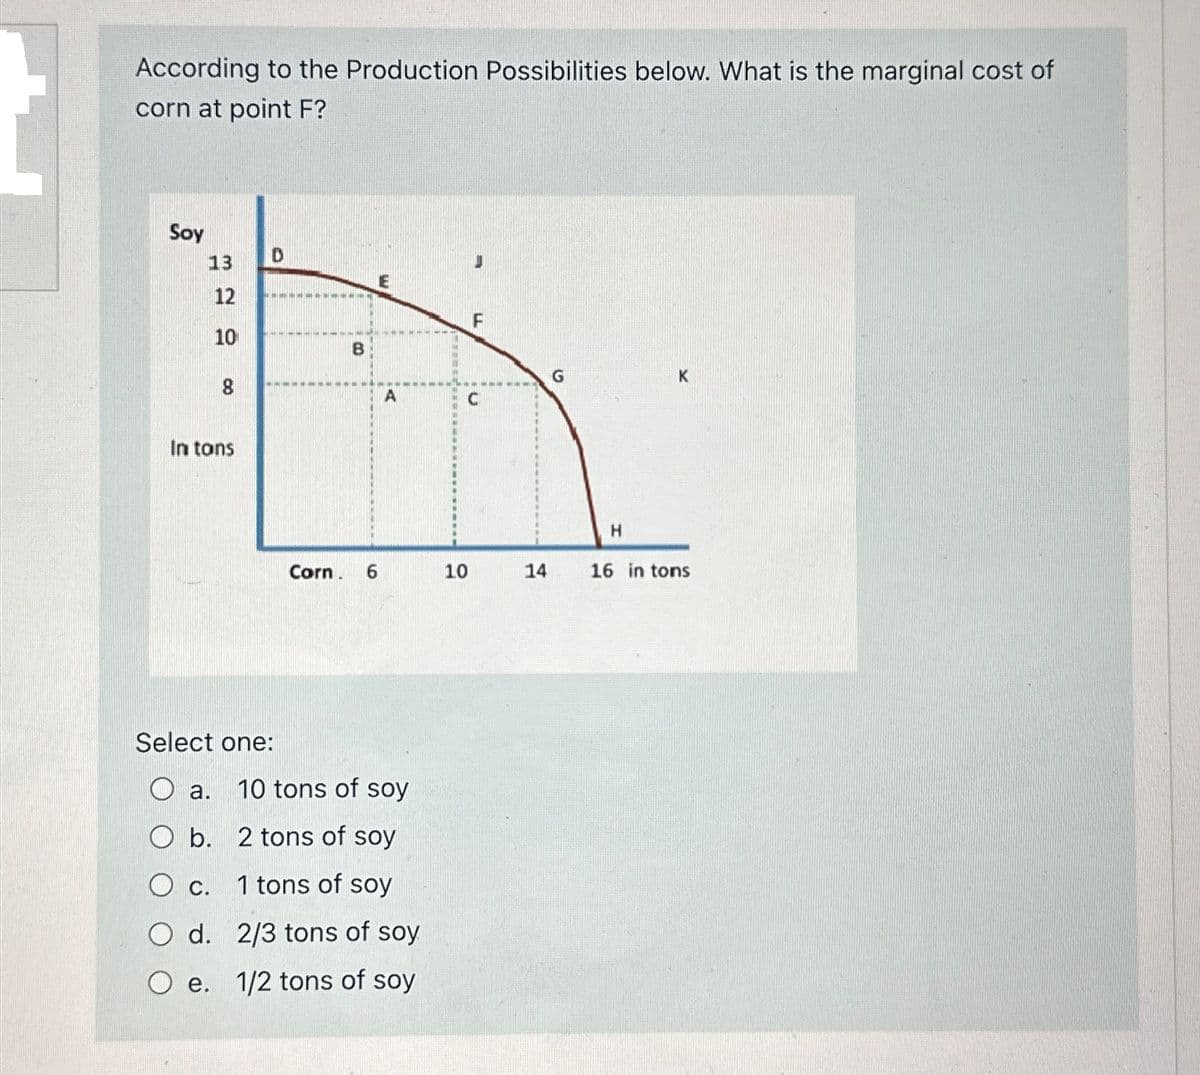 According to the Production Possibilities below. What is the marginal cost of
corn at point F?
Soy
13
12
10
8
In tons
D
www
Select one:
B
Corn. 6
E
10 tons of soy
a.
O b.
2 tons of soy
O c. 1 tons of soy
O d. 2/3 tons of soy
e. 1/2 tons of soy
F
C
10
14
G
H
K
16 in tons